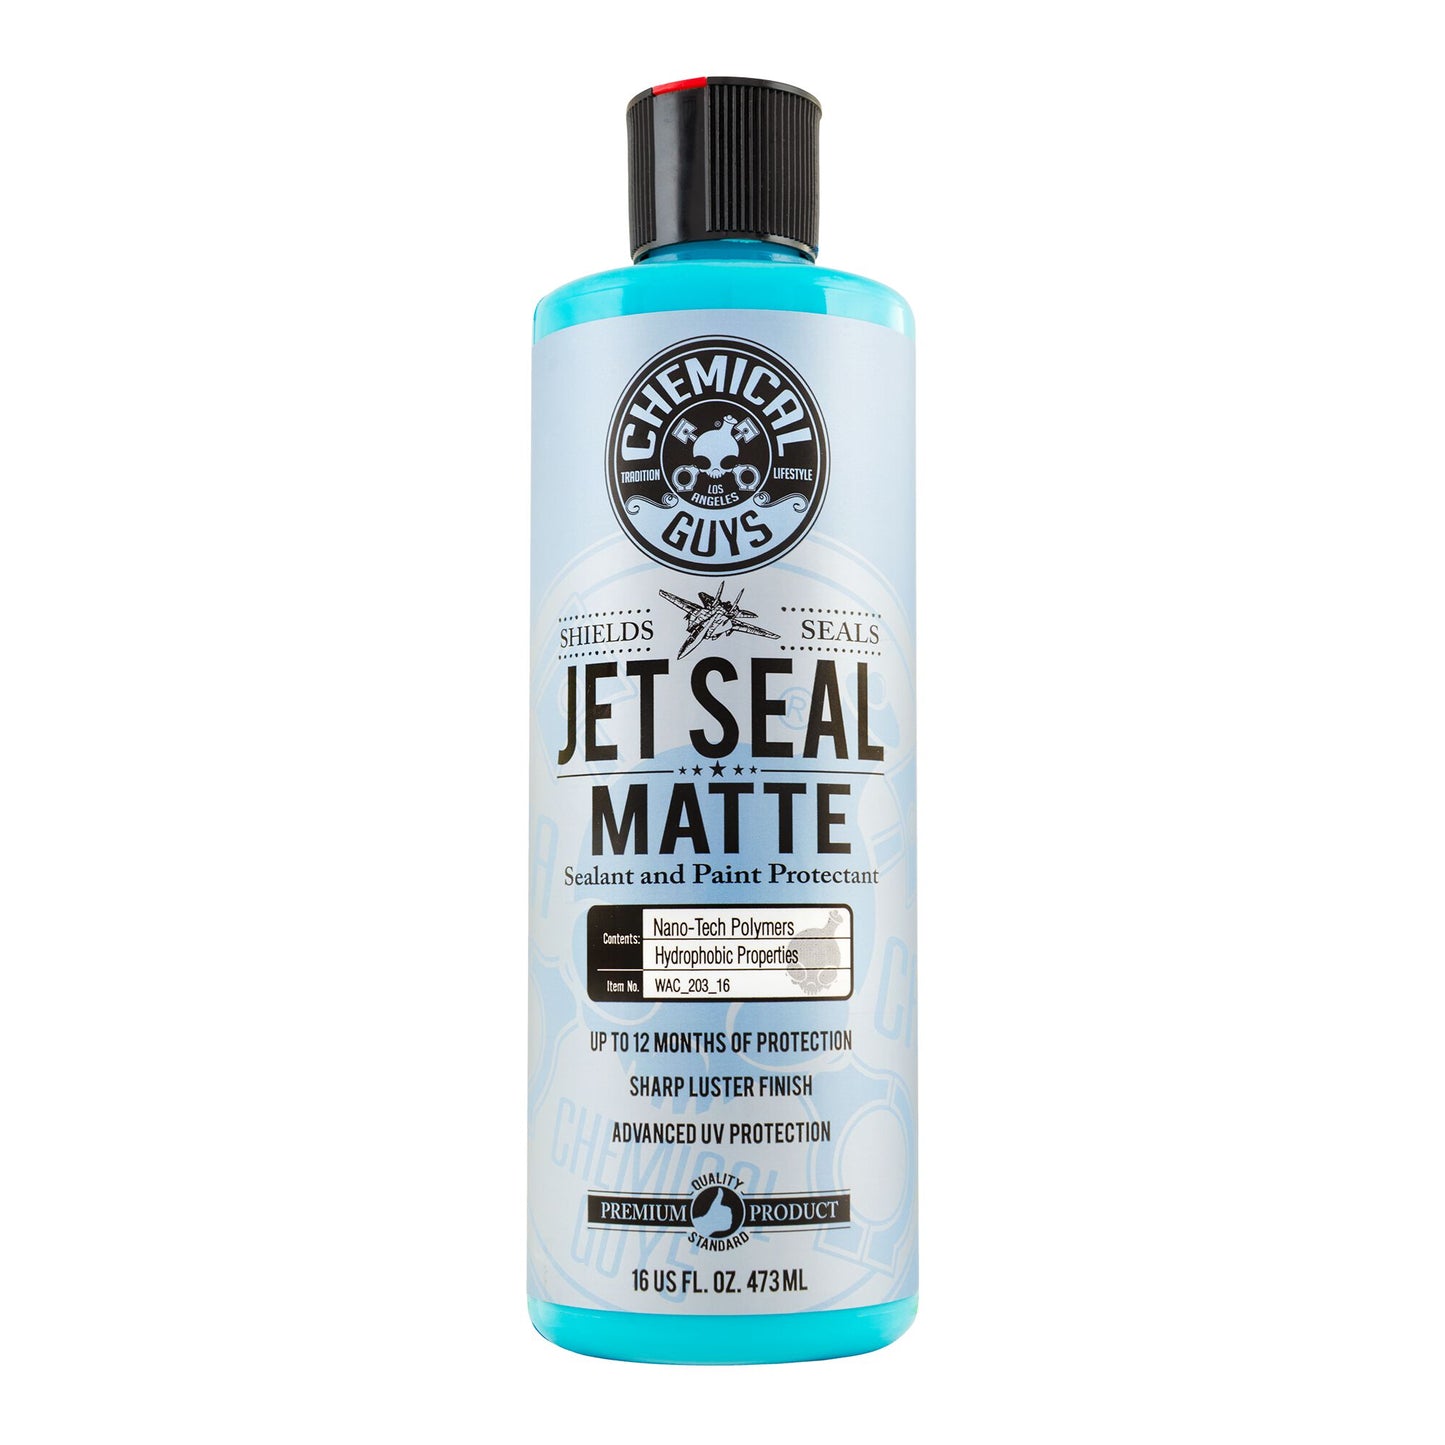 JetSeal Matte Sealant and Paint Protectant